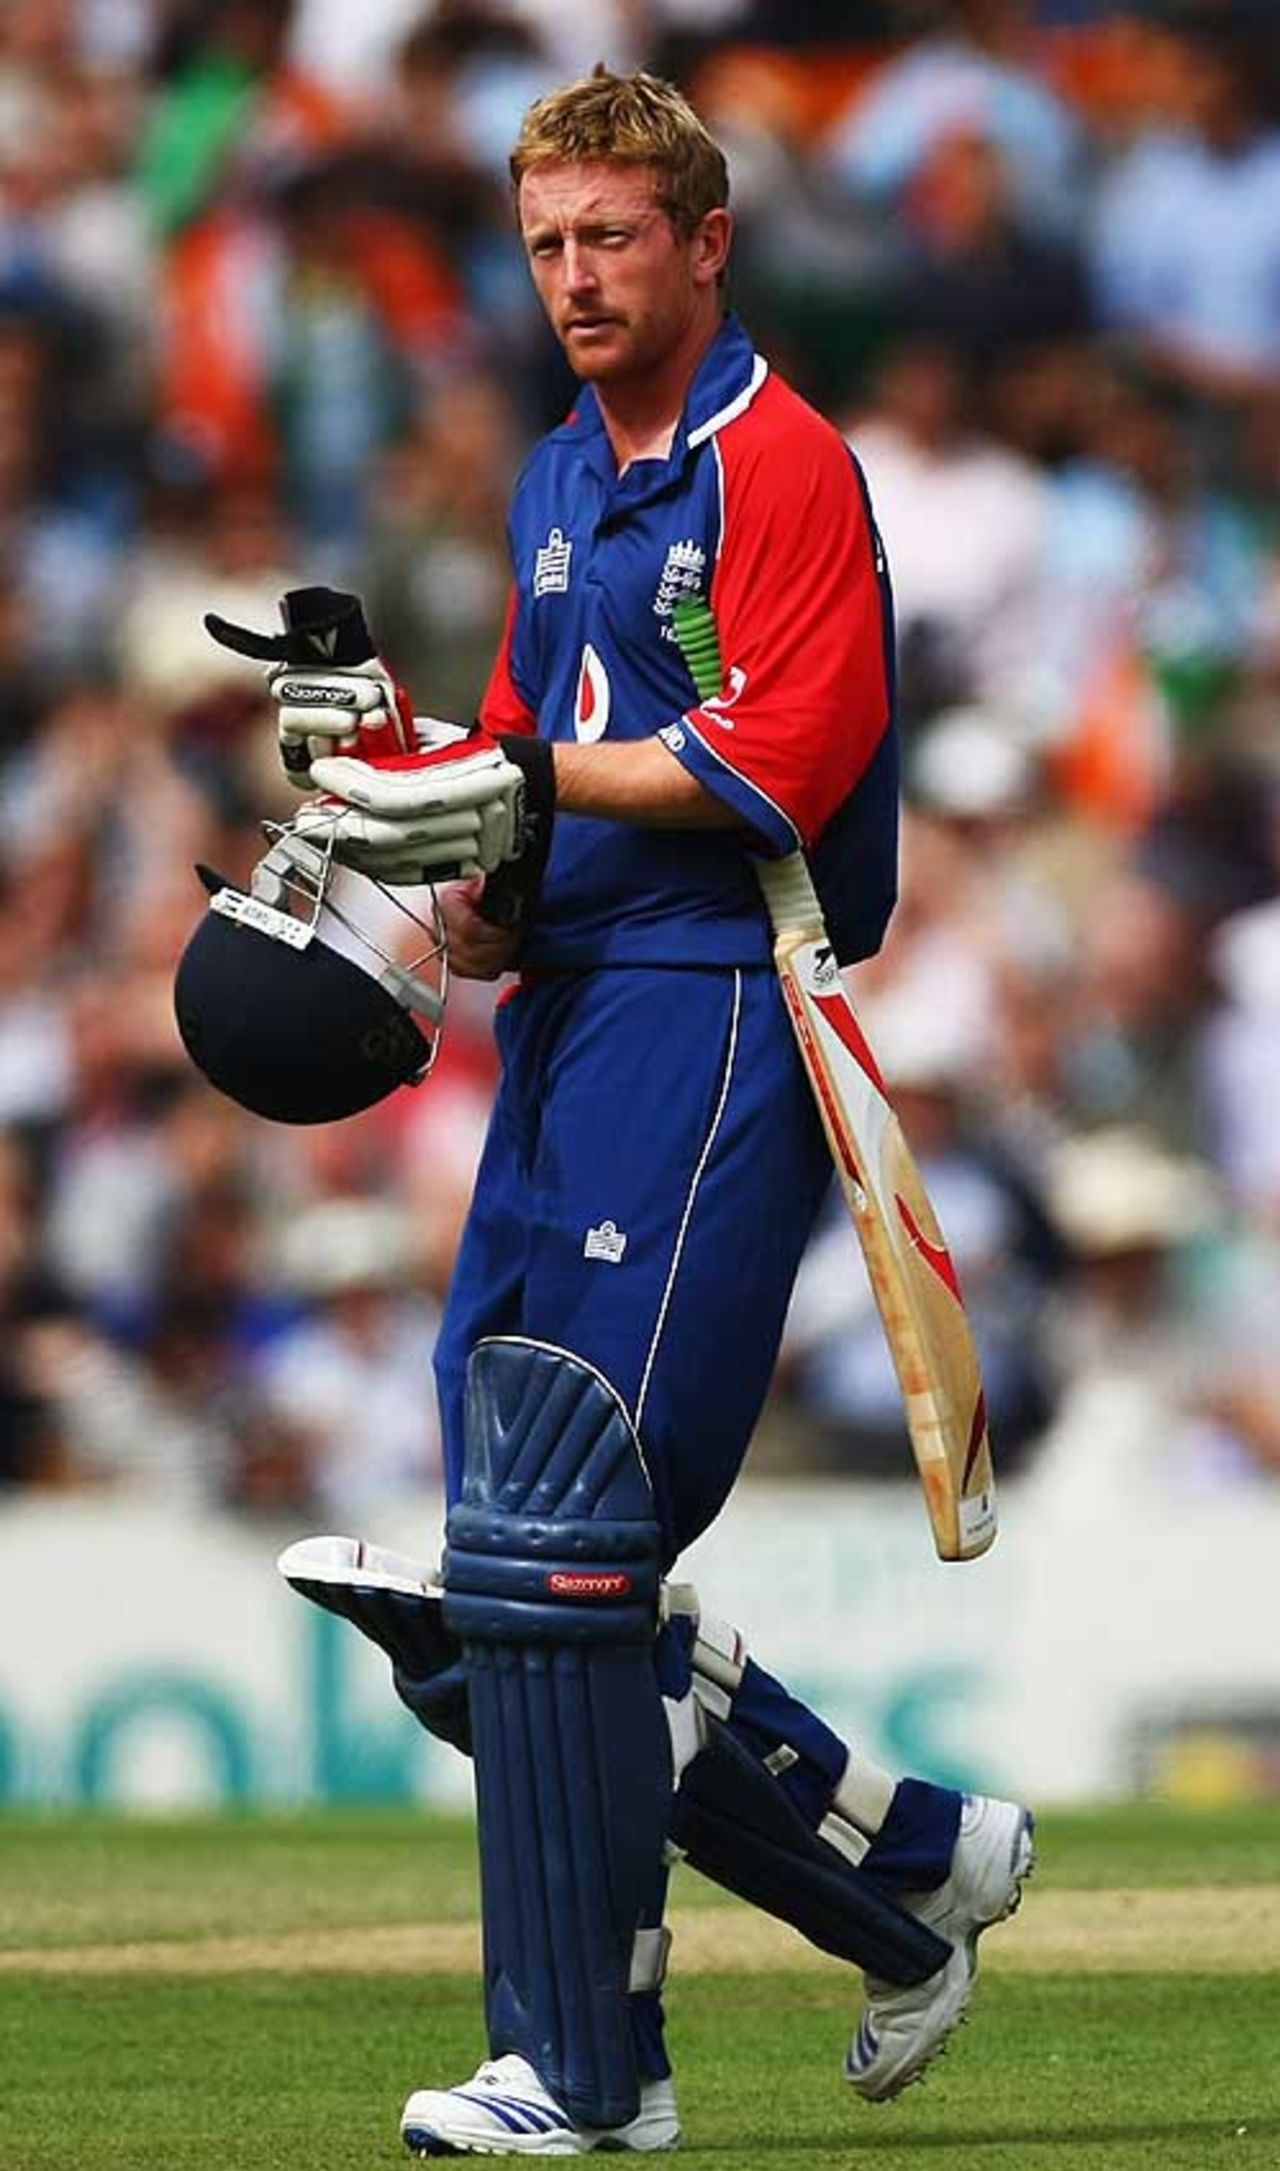 Paul Collingwood heads back to the pavilion after he was run out for 1, England v India, 6th ODI, The Oval, September 5, 2007